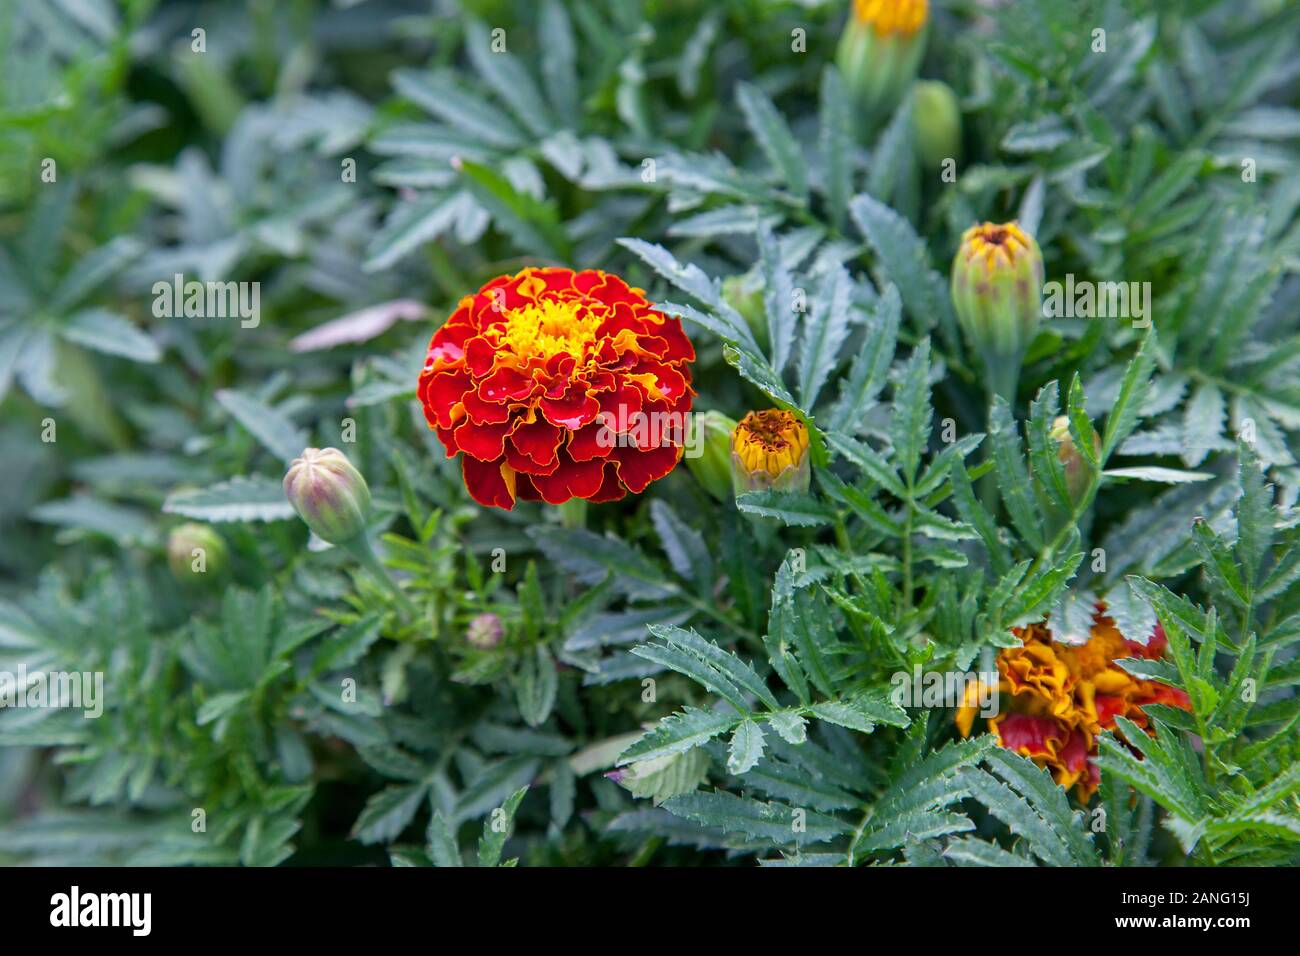 Close up of beautiful Marigold flower (Tagetes erecta, Mexican, Aztec or African marigold) in the garden. Marigold background or tagetes card. Stock Photo